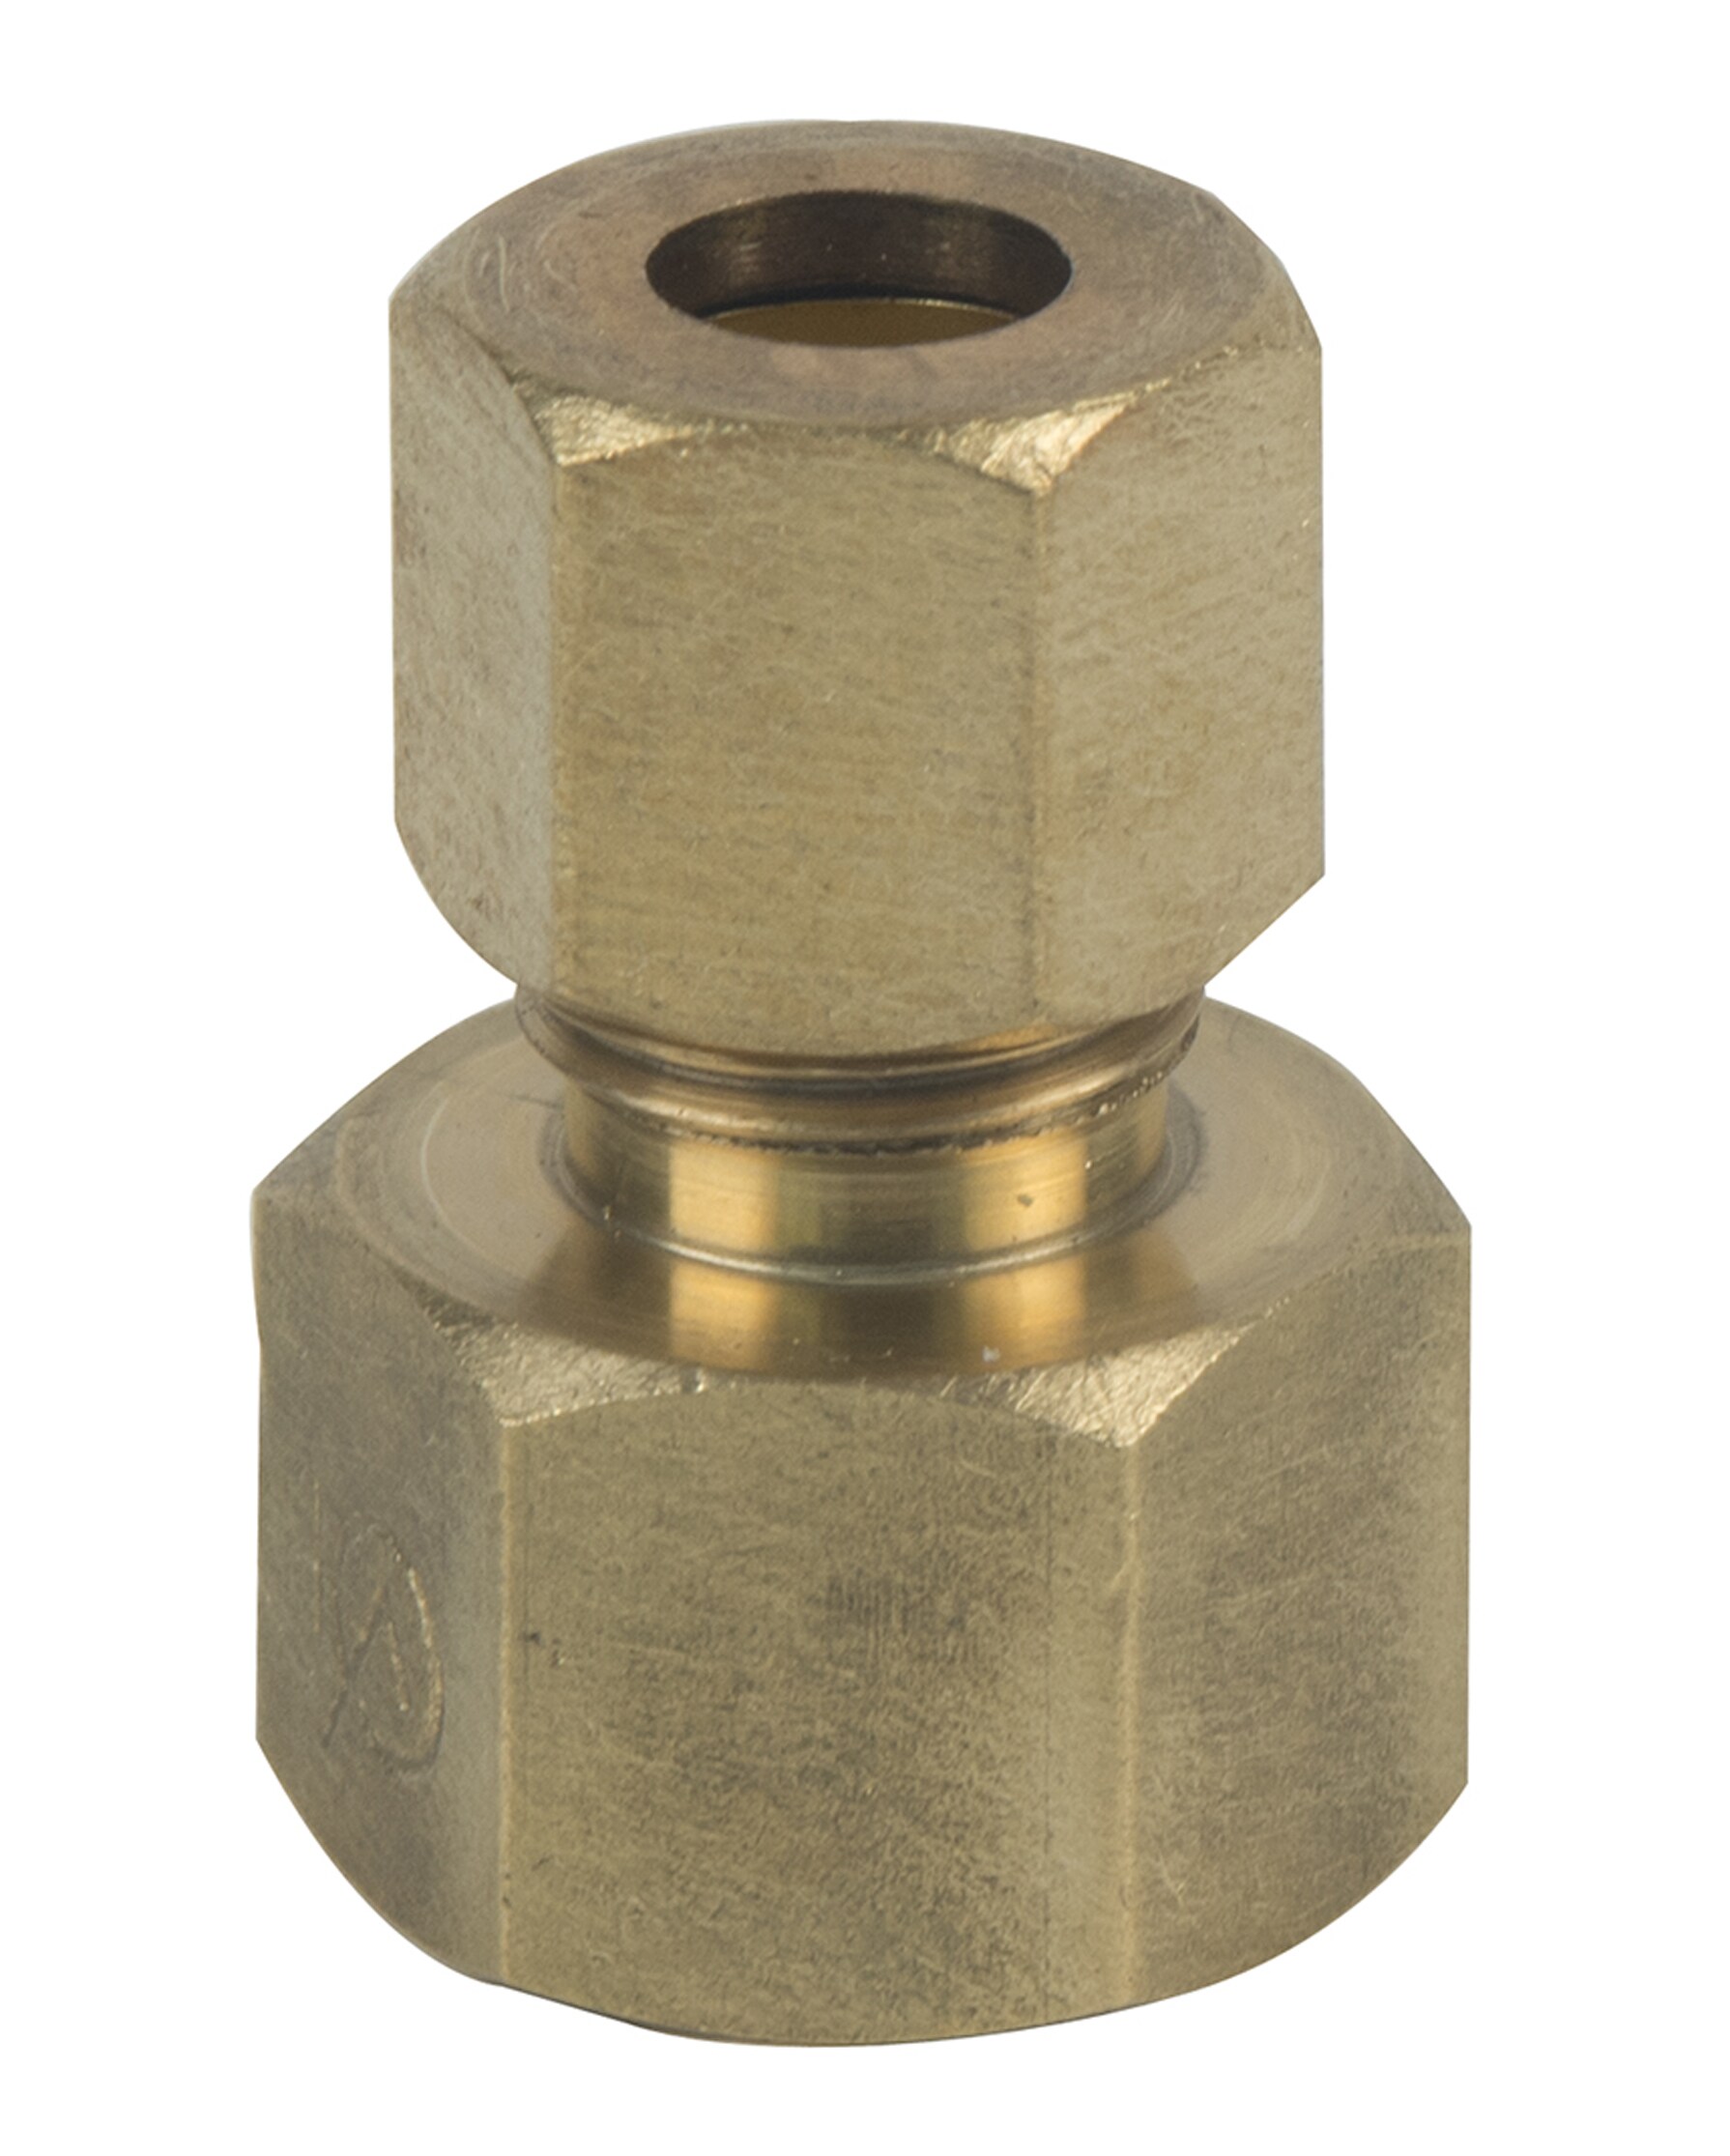 WADE BRASS COMPRESSION FITTINGS 10MM OD X 3/8" OD REDUCING COUPLING 9-00748 